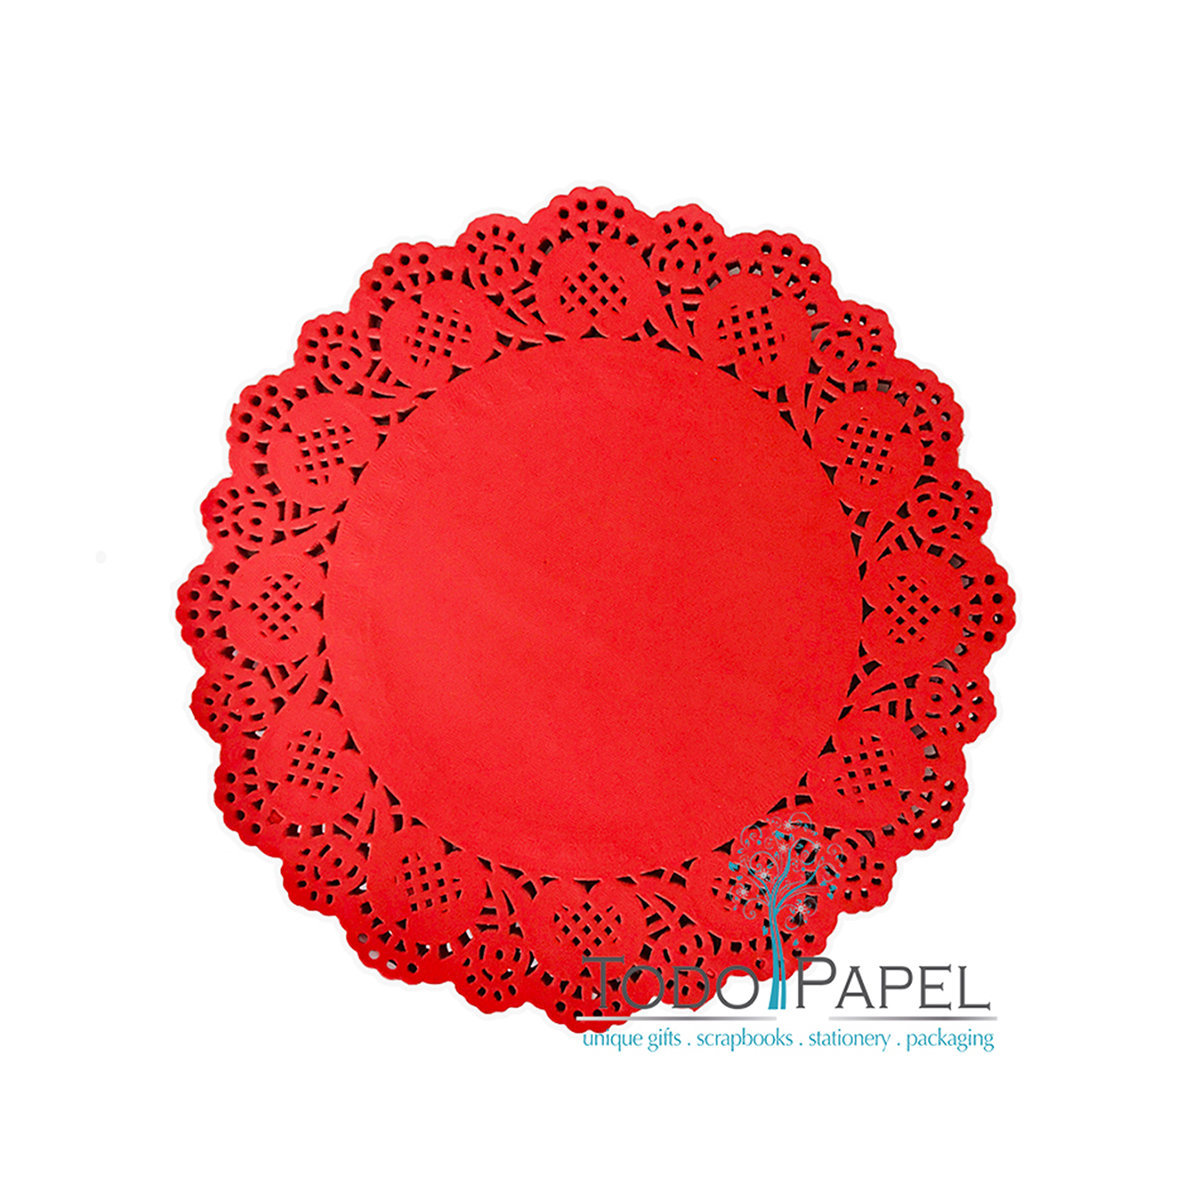 100 Pack - 10" Red Lace Paper Doily- Great Wedding Reception Table Deocr - Perfect As Red Chargers, Centerpieces, Placemats And